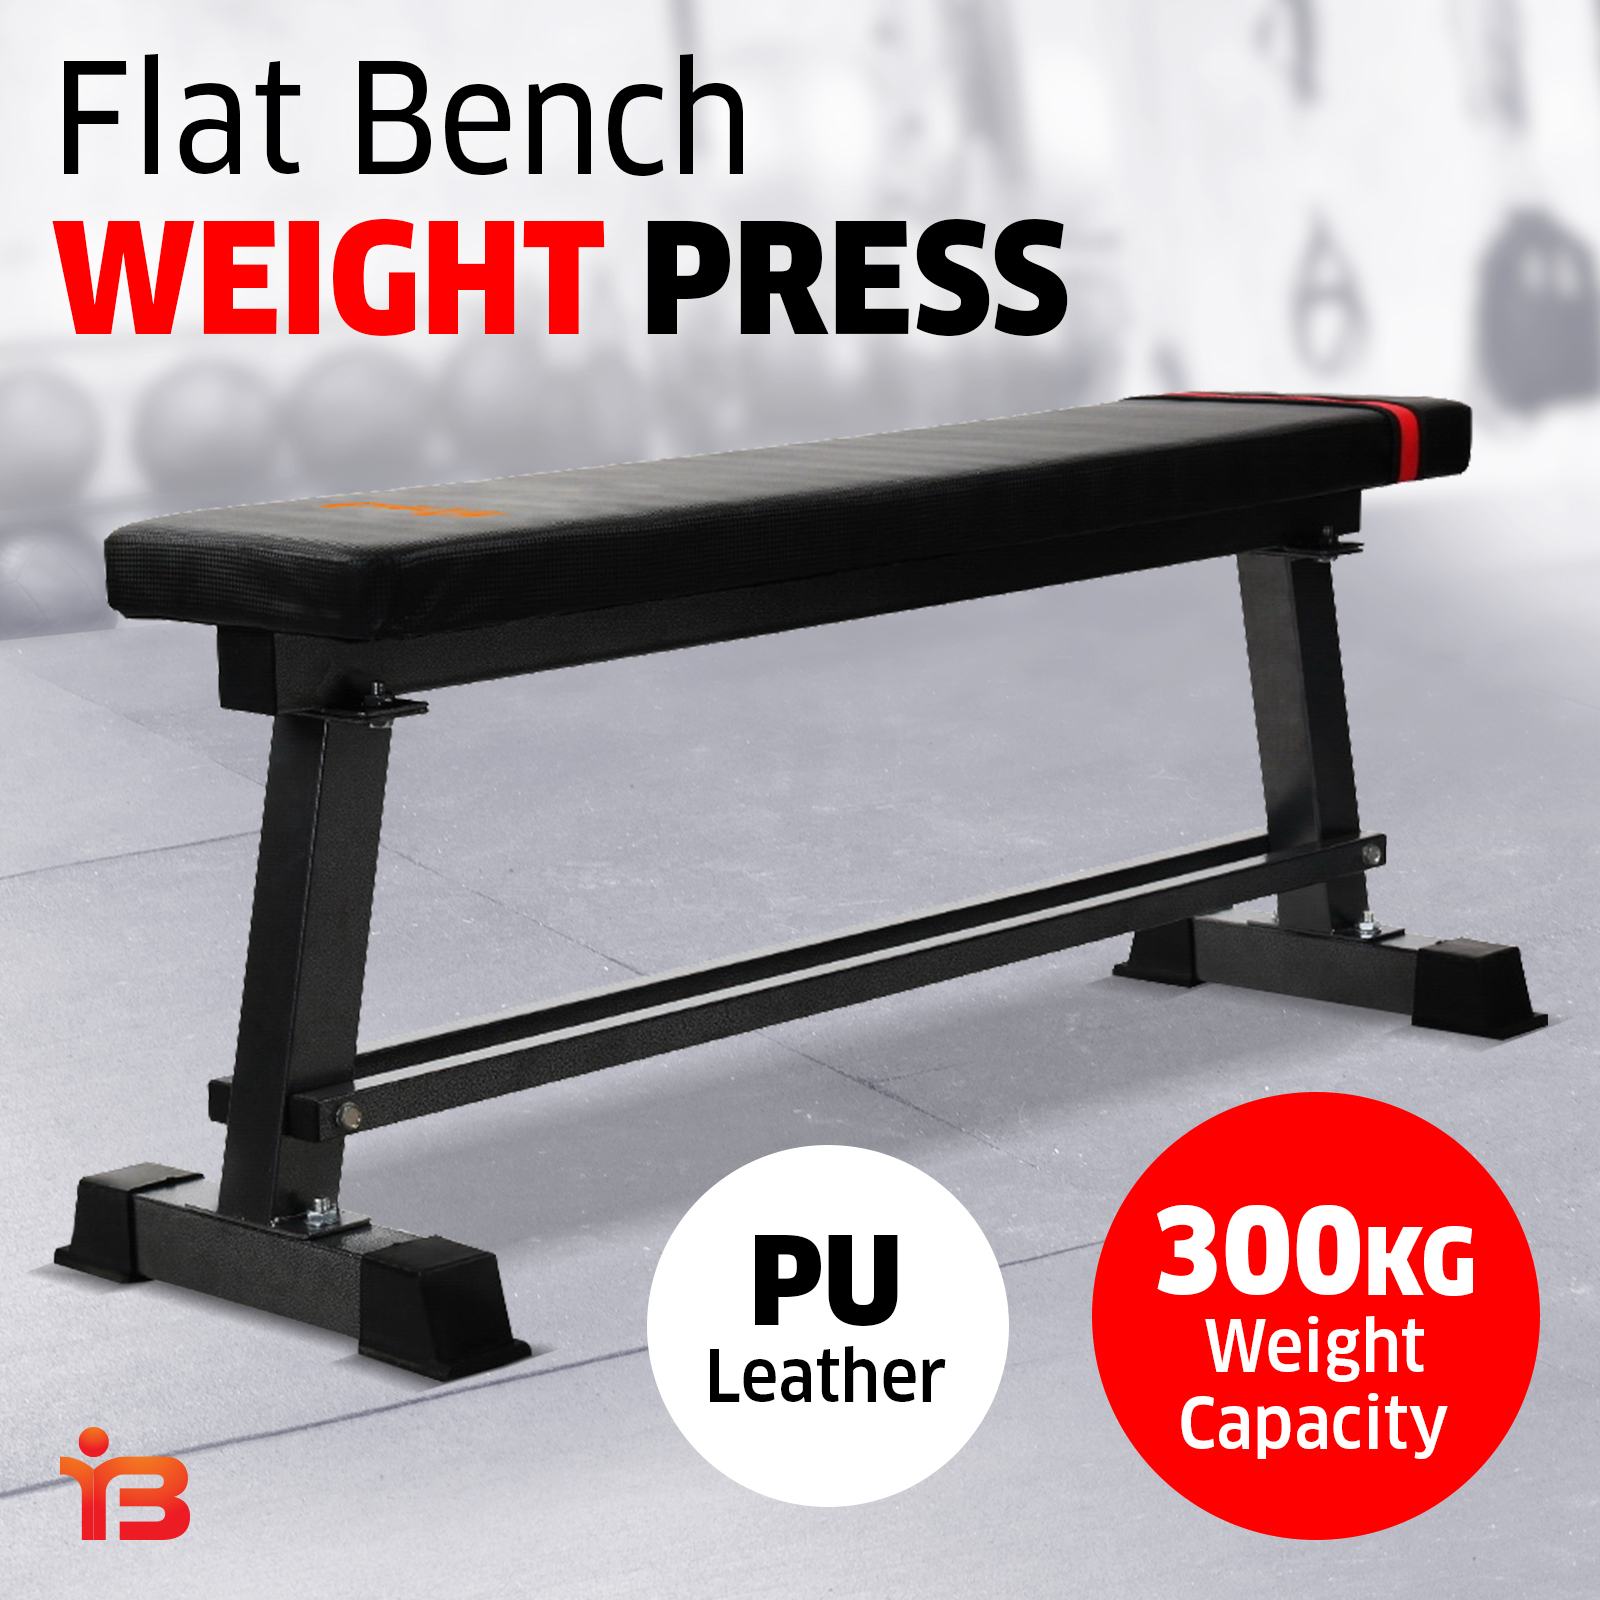 PU Leather Everfit Flat Bench Weight Press Gym Exercise Fitness Equipment 